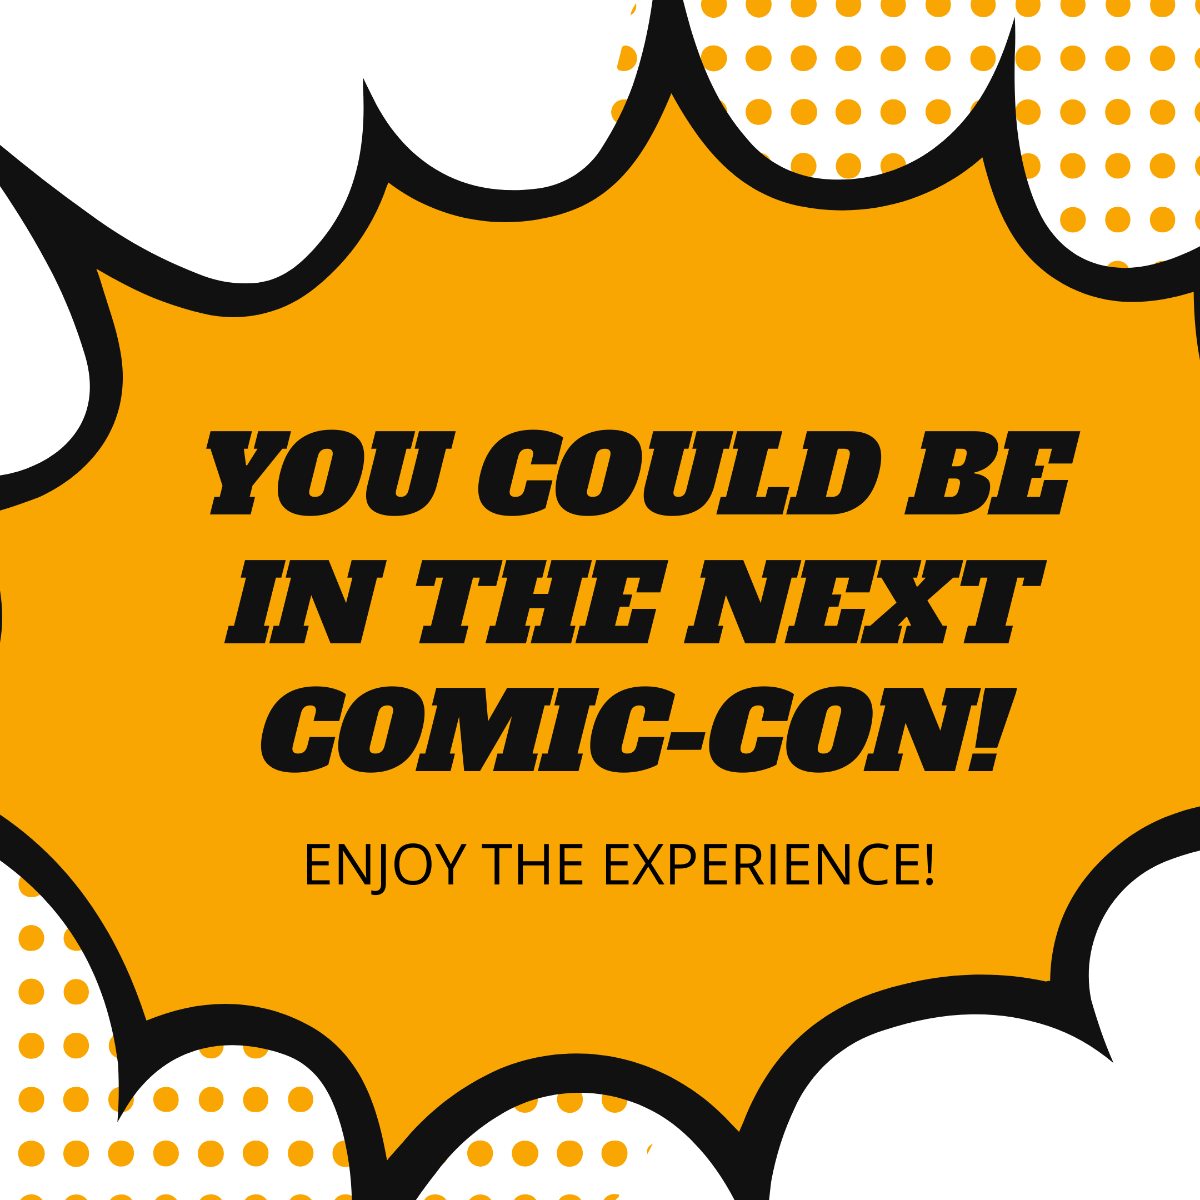 Comic-Con Greeting Card Vector Template